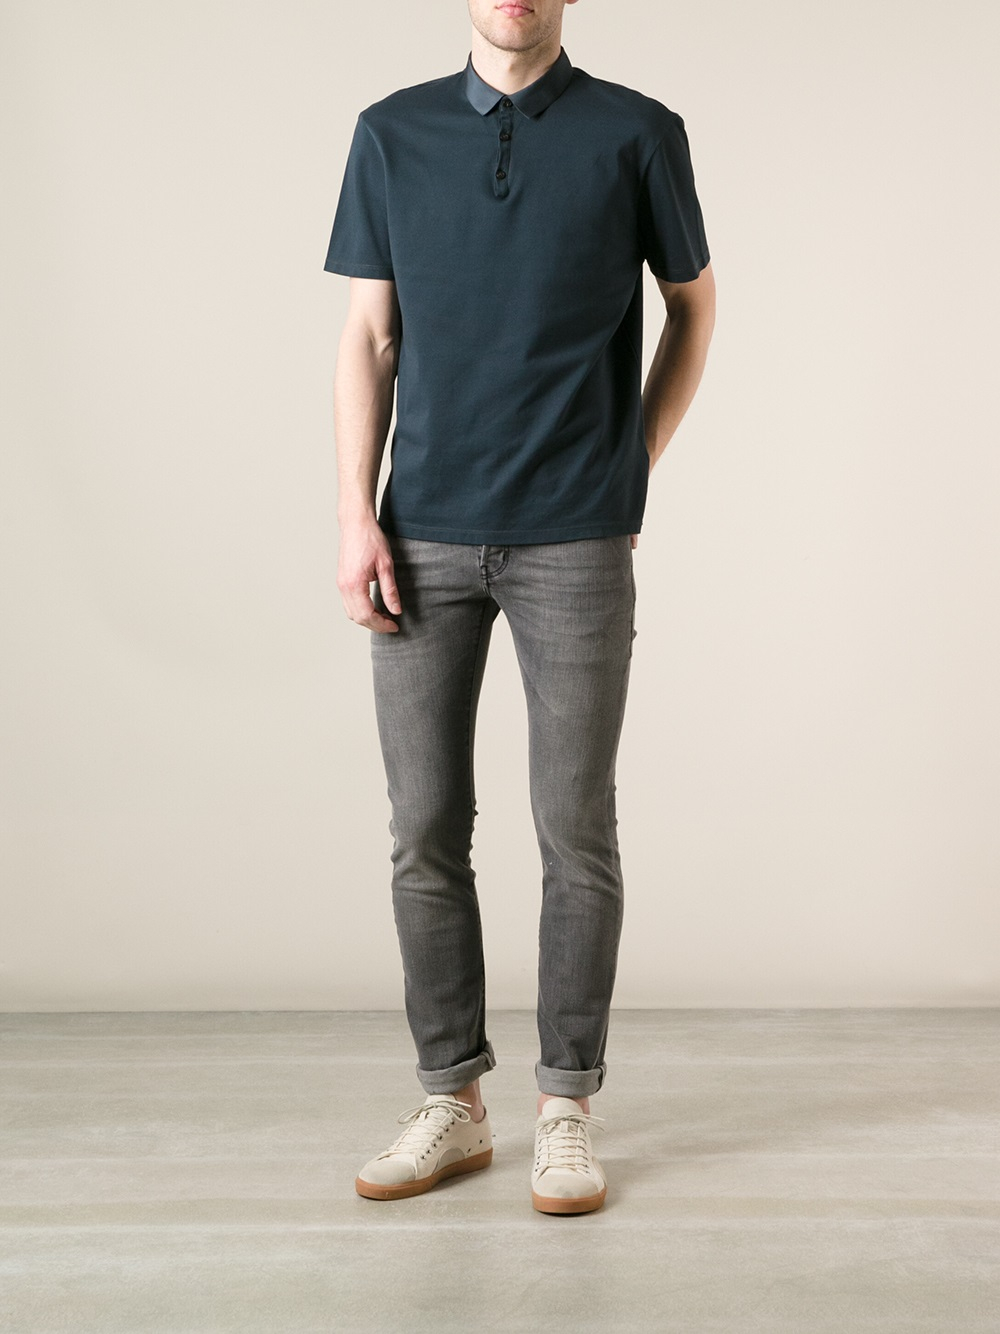 Lyst - Saint laurent Stone Washed Jeans in Gray for Men